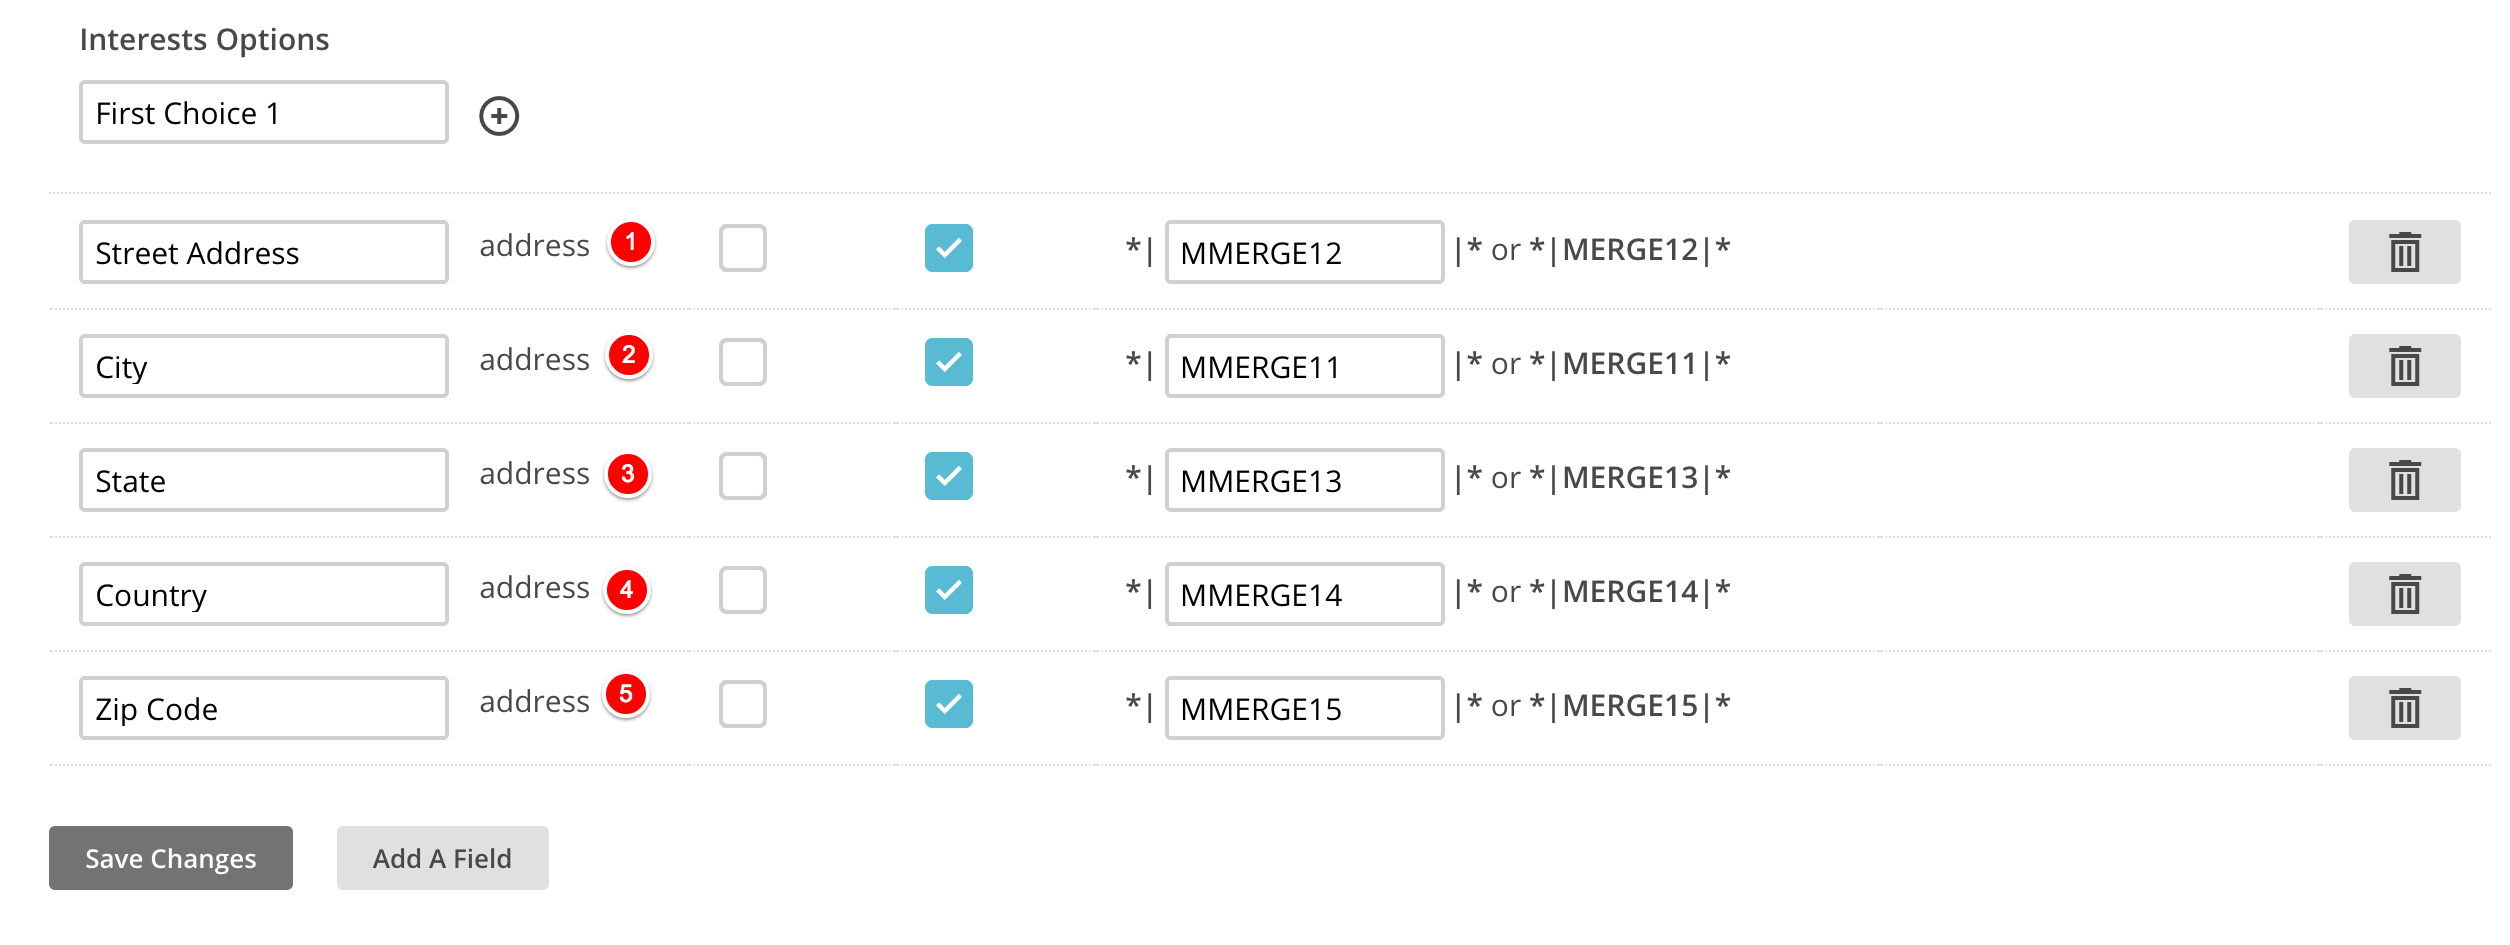 List_Fields_and___MERGE___Tags_for_Unit_Test___MailChimp__1_.png